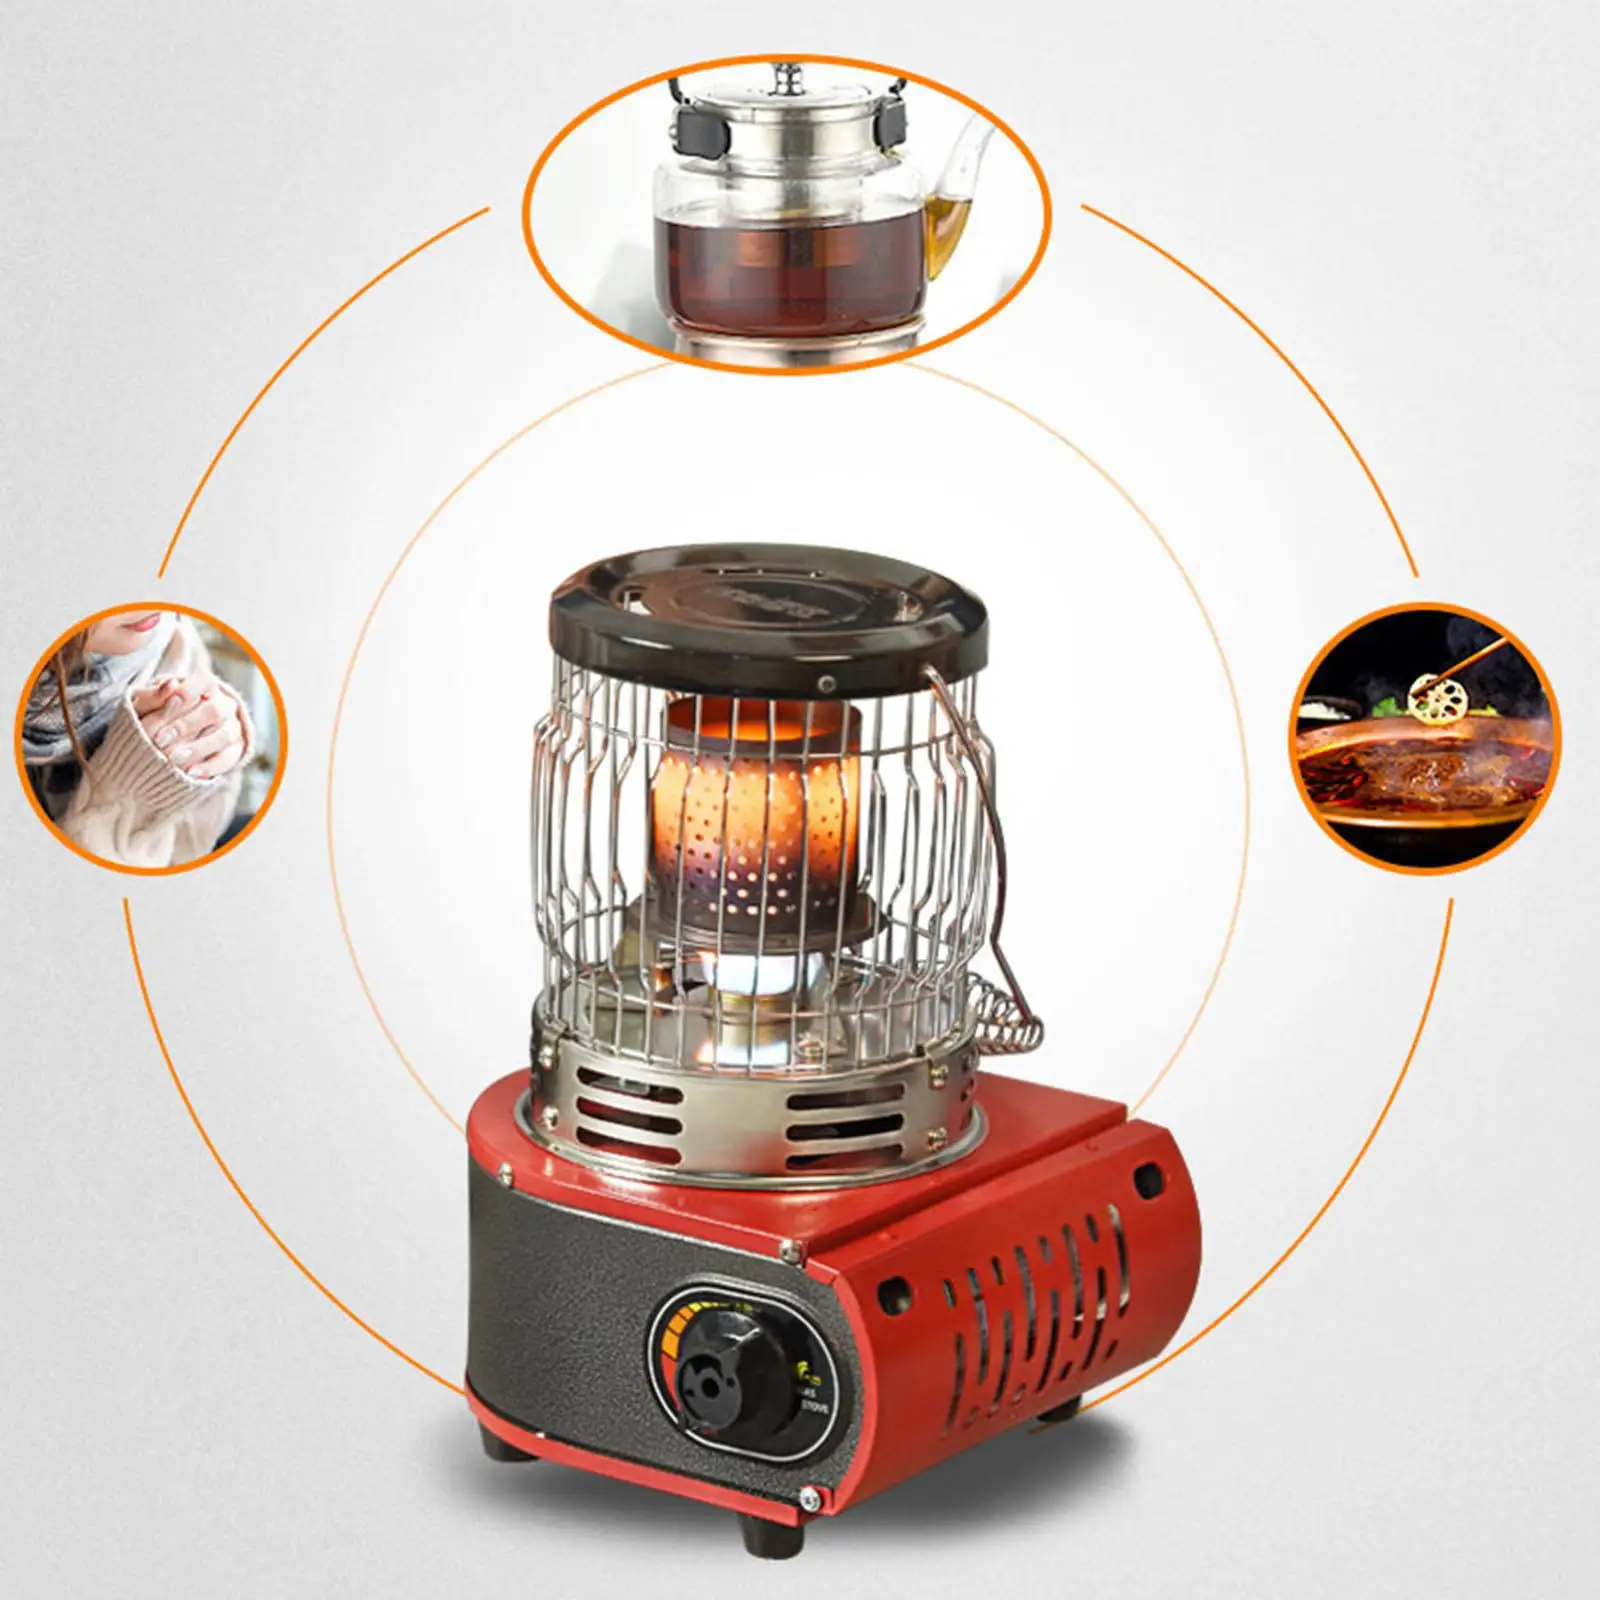 Portable 2-in-1 Gases Heater Multifunctional Heating Stove Outdoor Winter Heated Gases Stove for Outdoor Cooking Camping Picnic